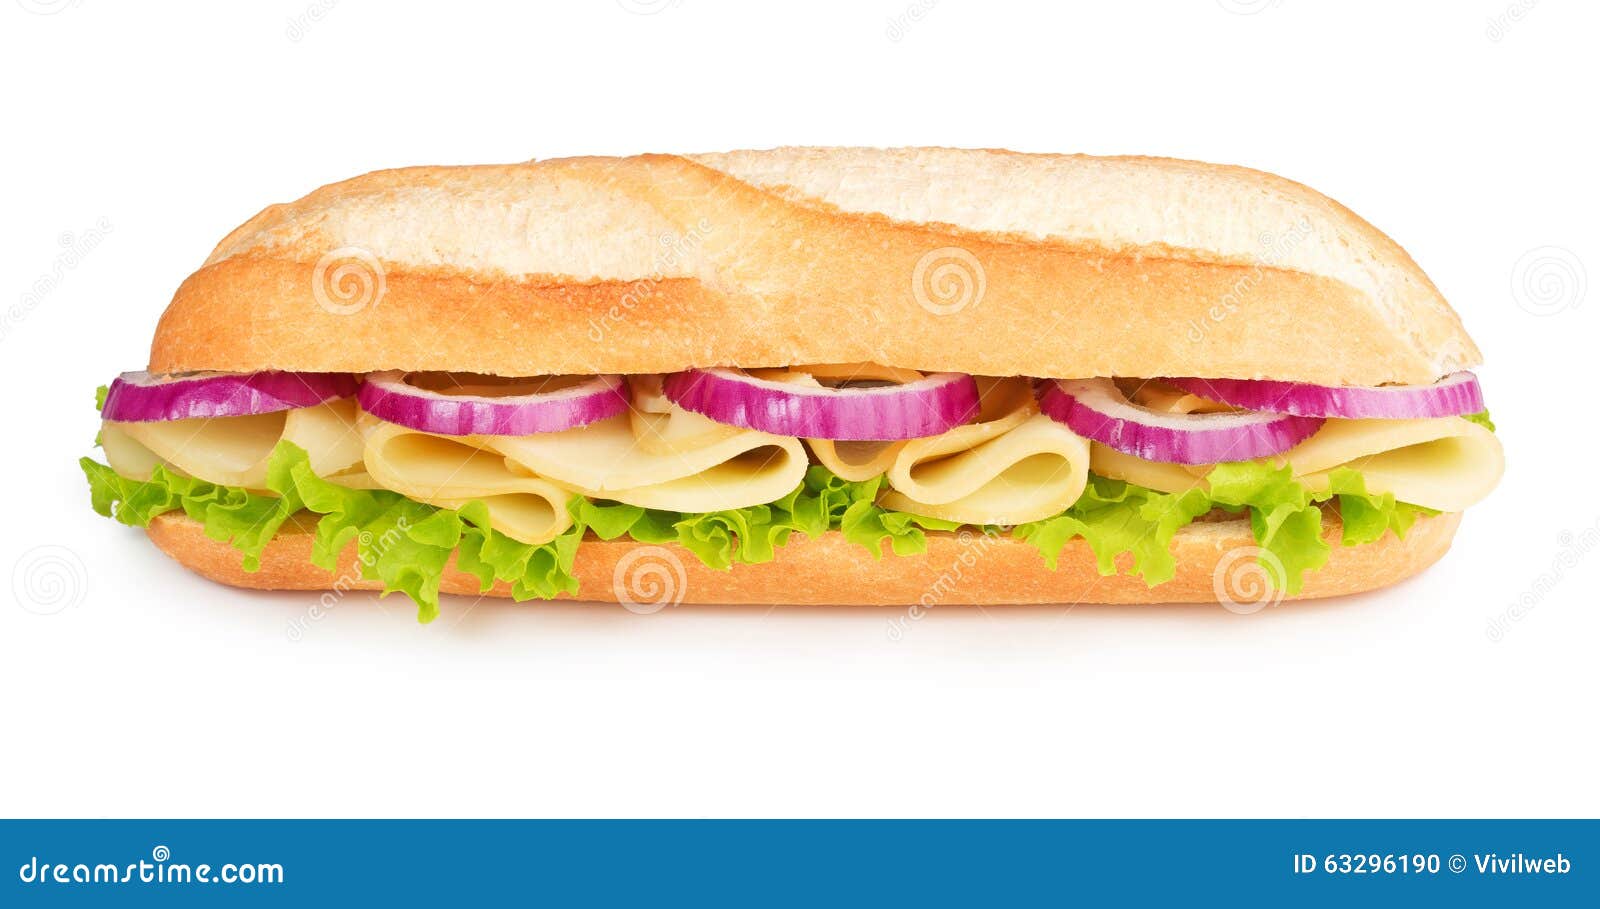 Any icrap users? Cheese-lettuce-red-onion-sandwich-baguette-63296190